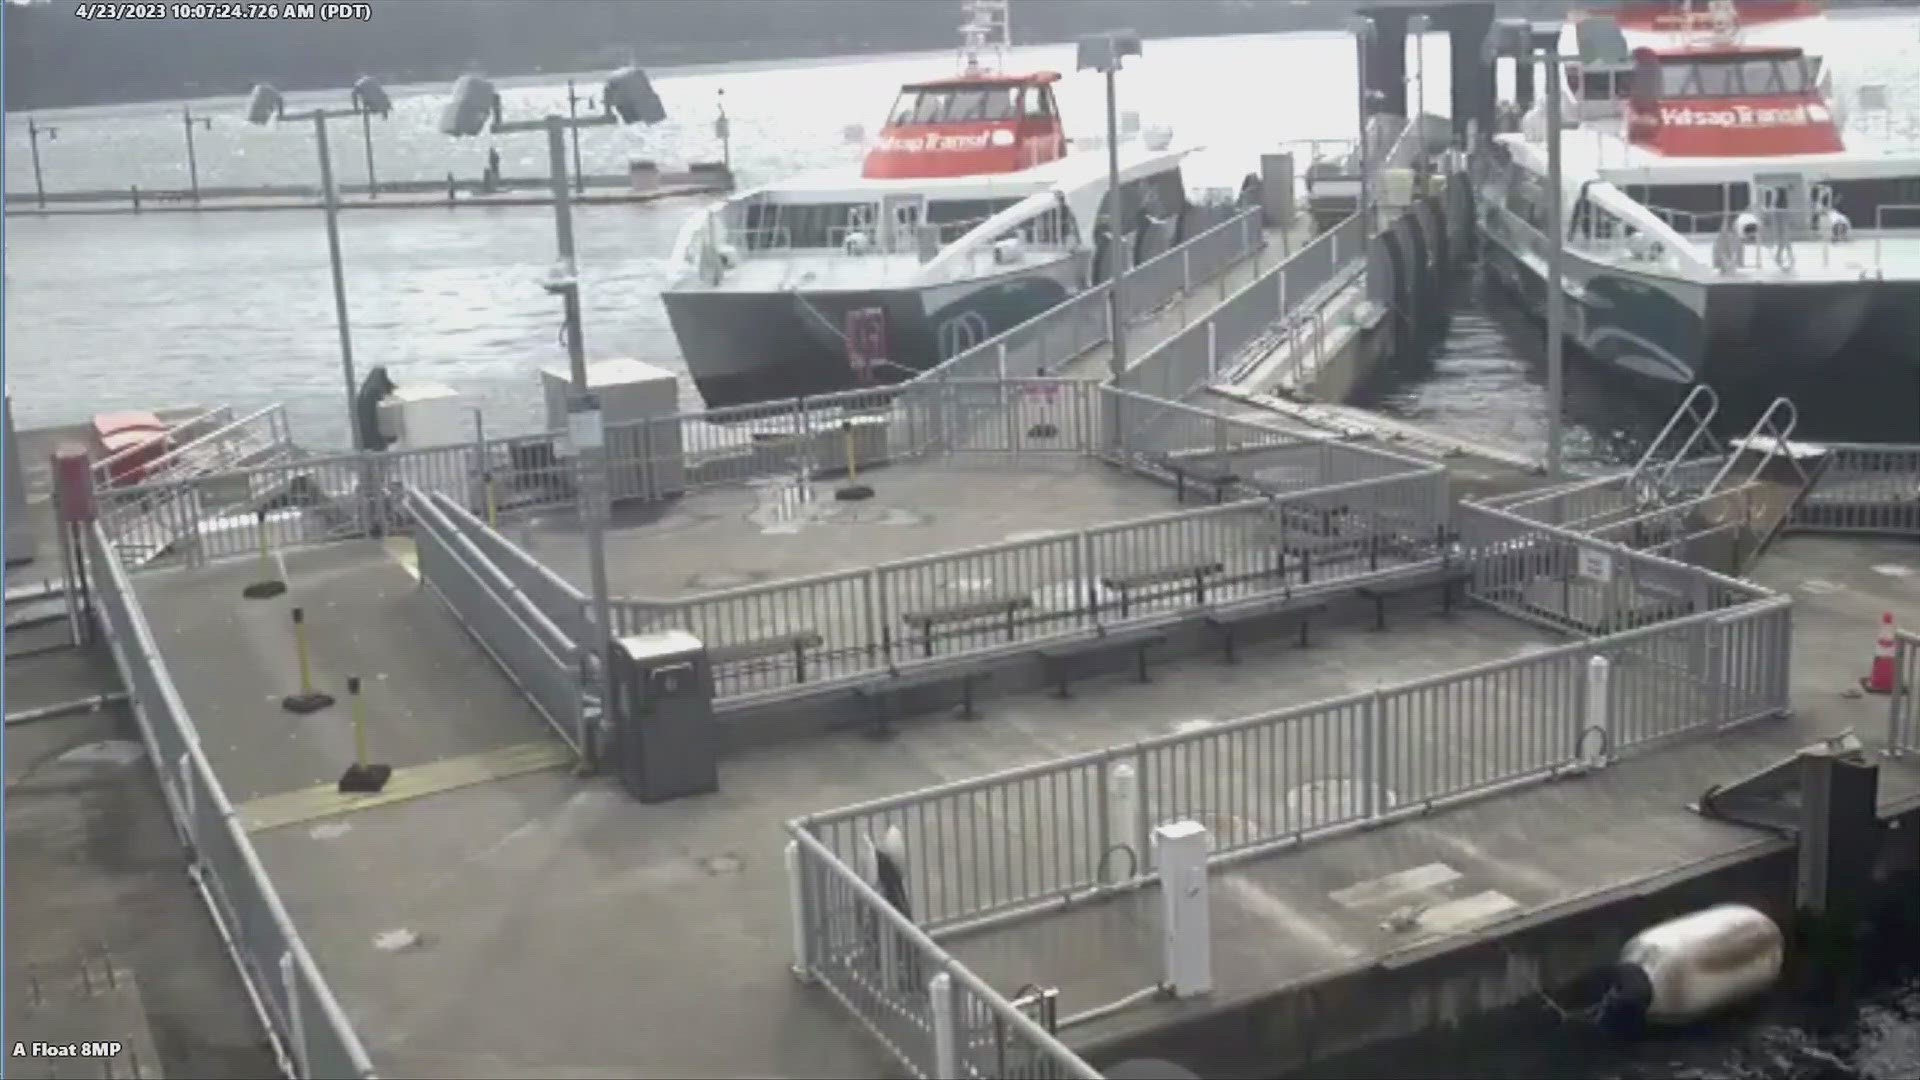 Surveillance video from Kitsap Transit shows the man attempting to operate the vessel before being arrested on Sunday.